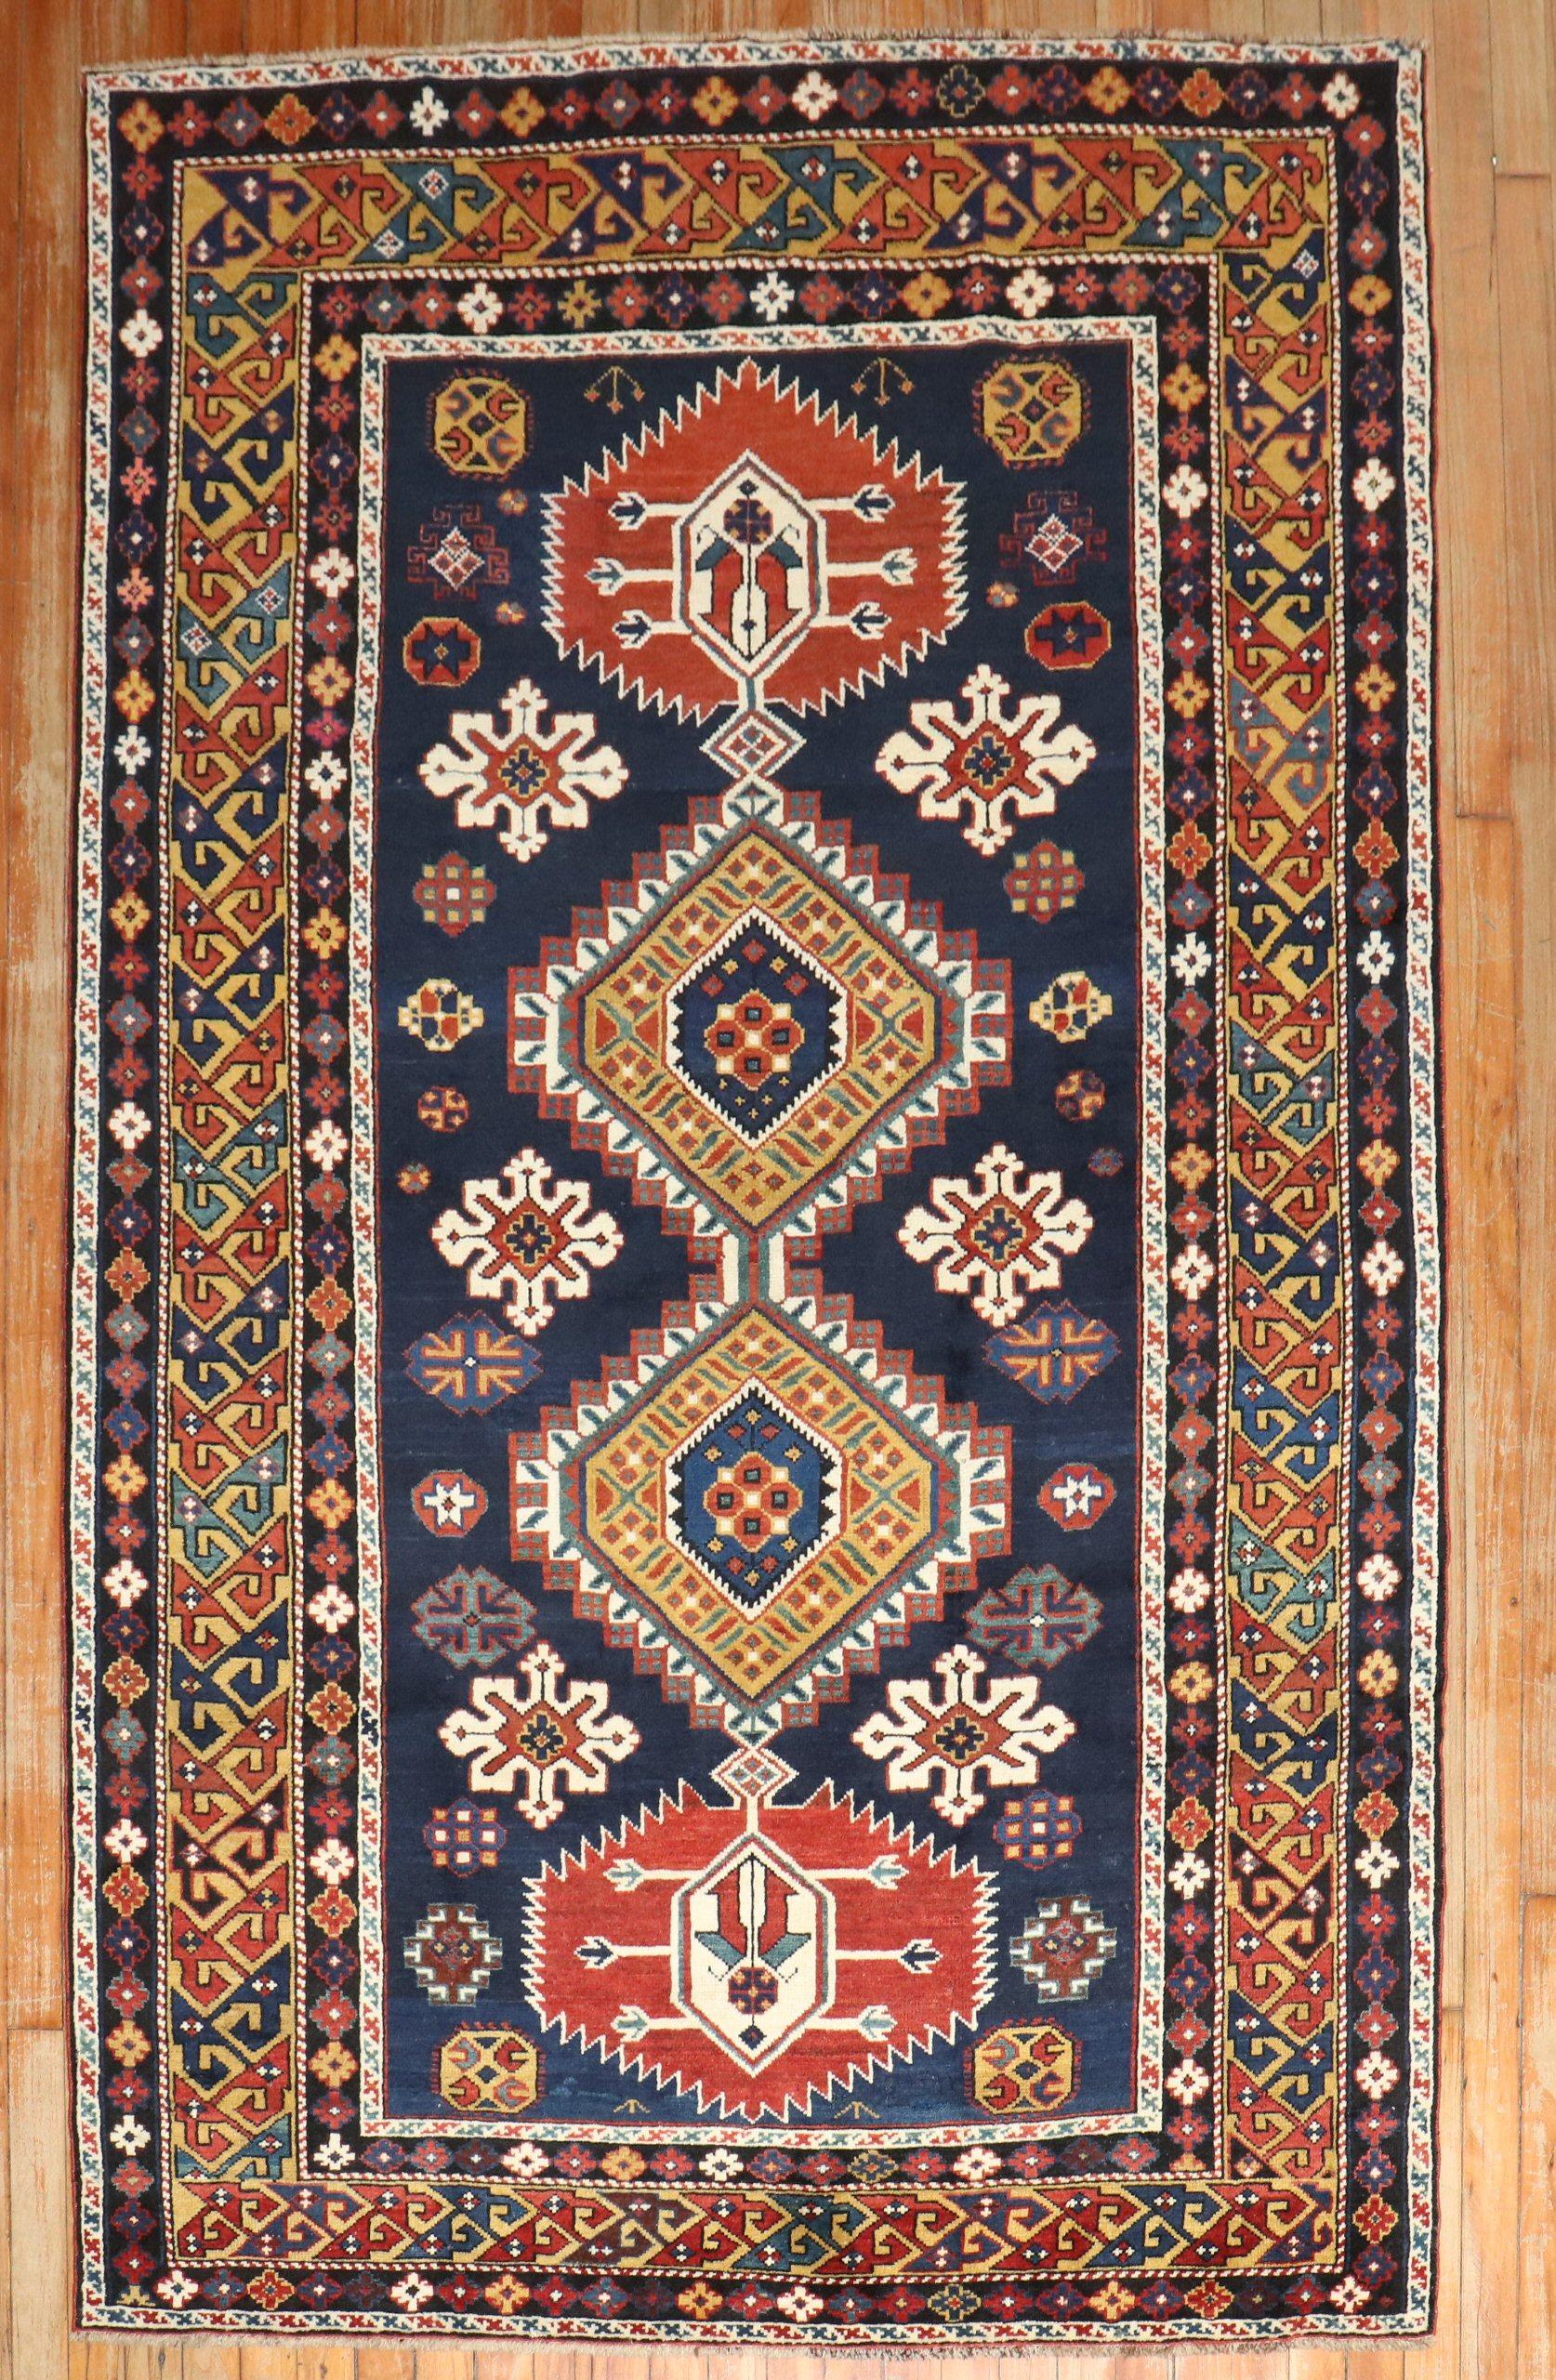 Late 19th century accent size shirvan rug

Details
rug no.	j3550
size	4' 6